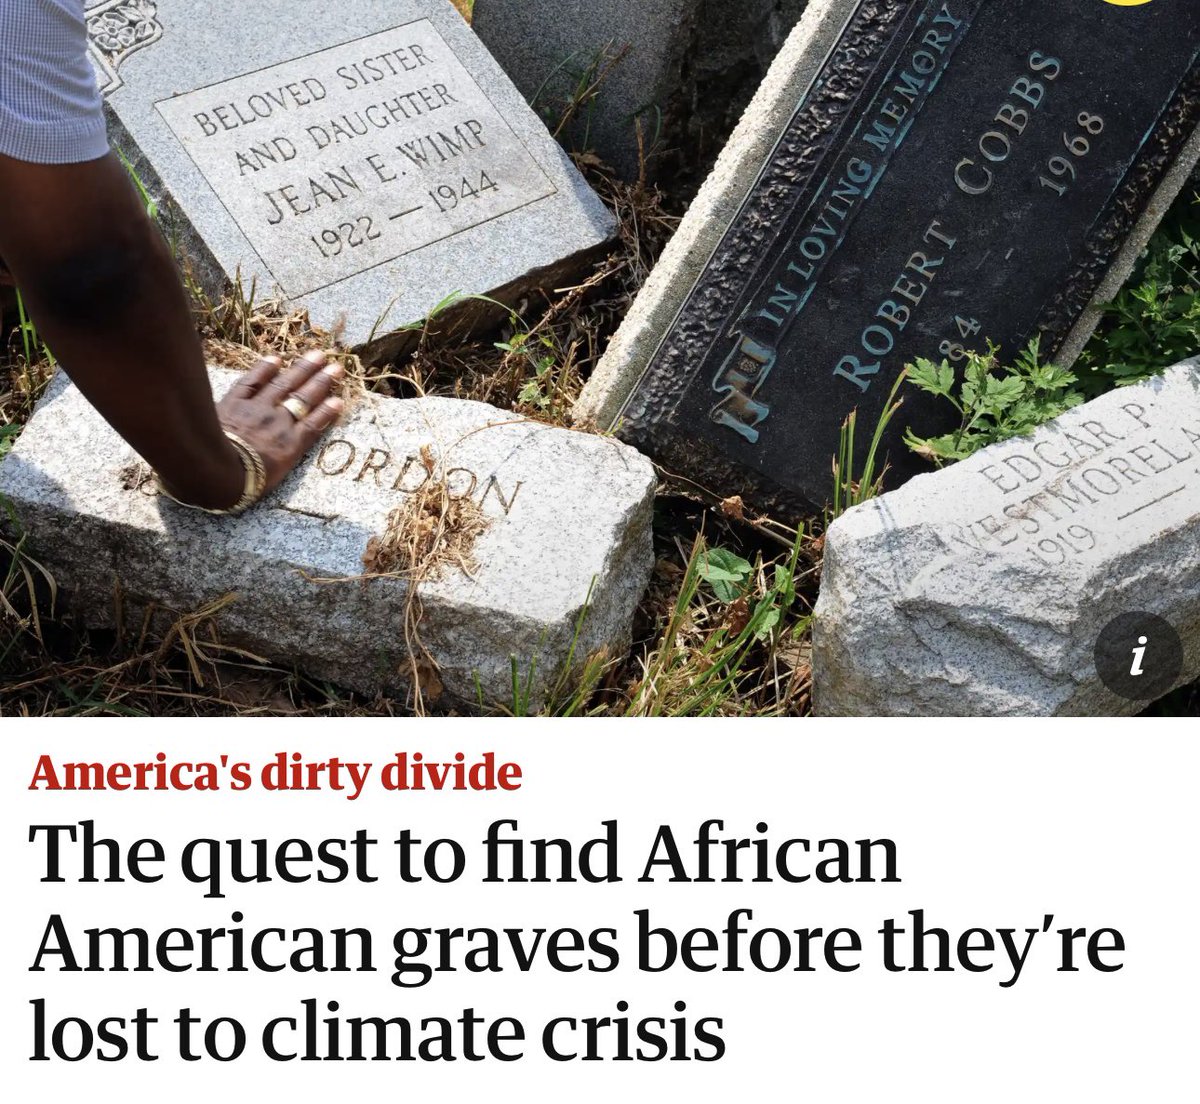 As both the climate crisis and development intensify, Black cemeteries are now at a disproportionate risk of being lost, some before they have even been officially found #EarthDay amp.theguardian.com/us-news/2021/s…